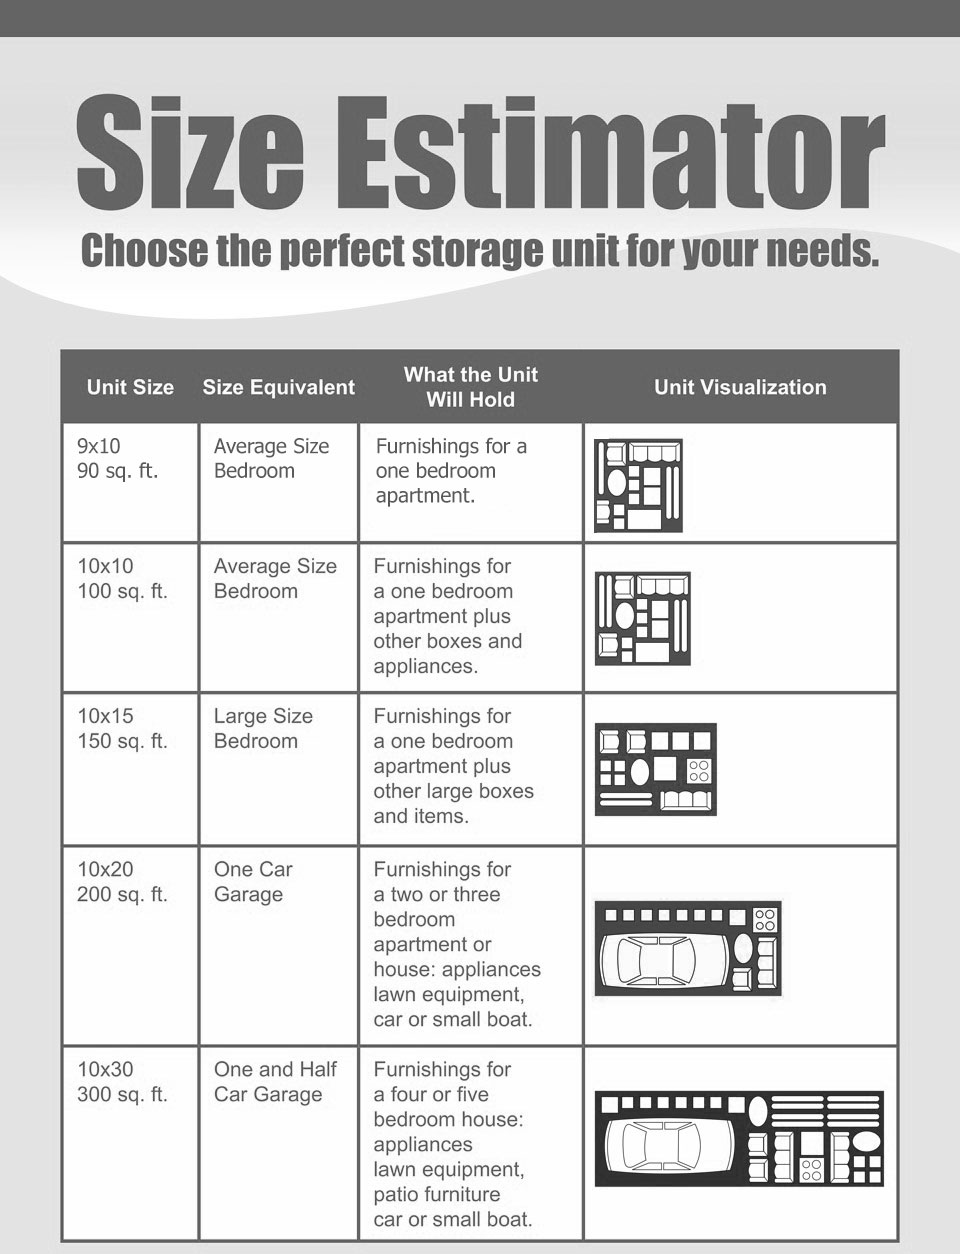 storage unit - Size Estimator Choose the perfect storage unit for your needs. Unit Size Size Equivalent What the Unit Will Hold Unit Visualization 9x10 90 sq. ft. Average Size Bedroom Ciu Furnishings for a one bedroom apartment. 10x10 100 sq. ft. Average 